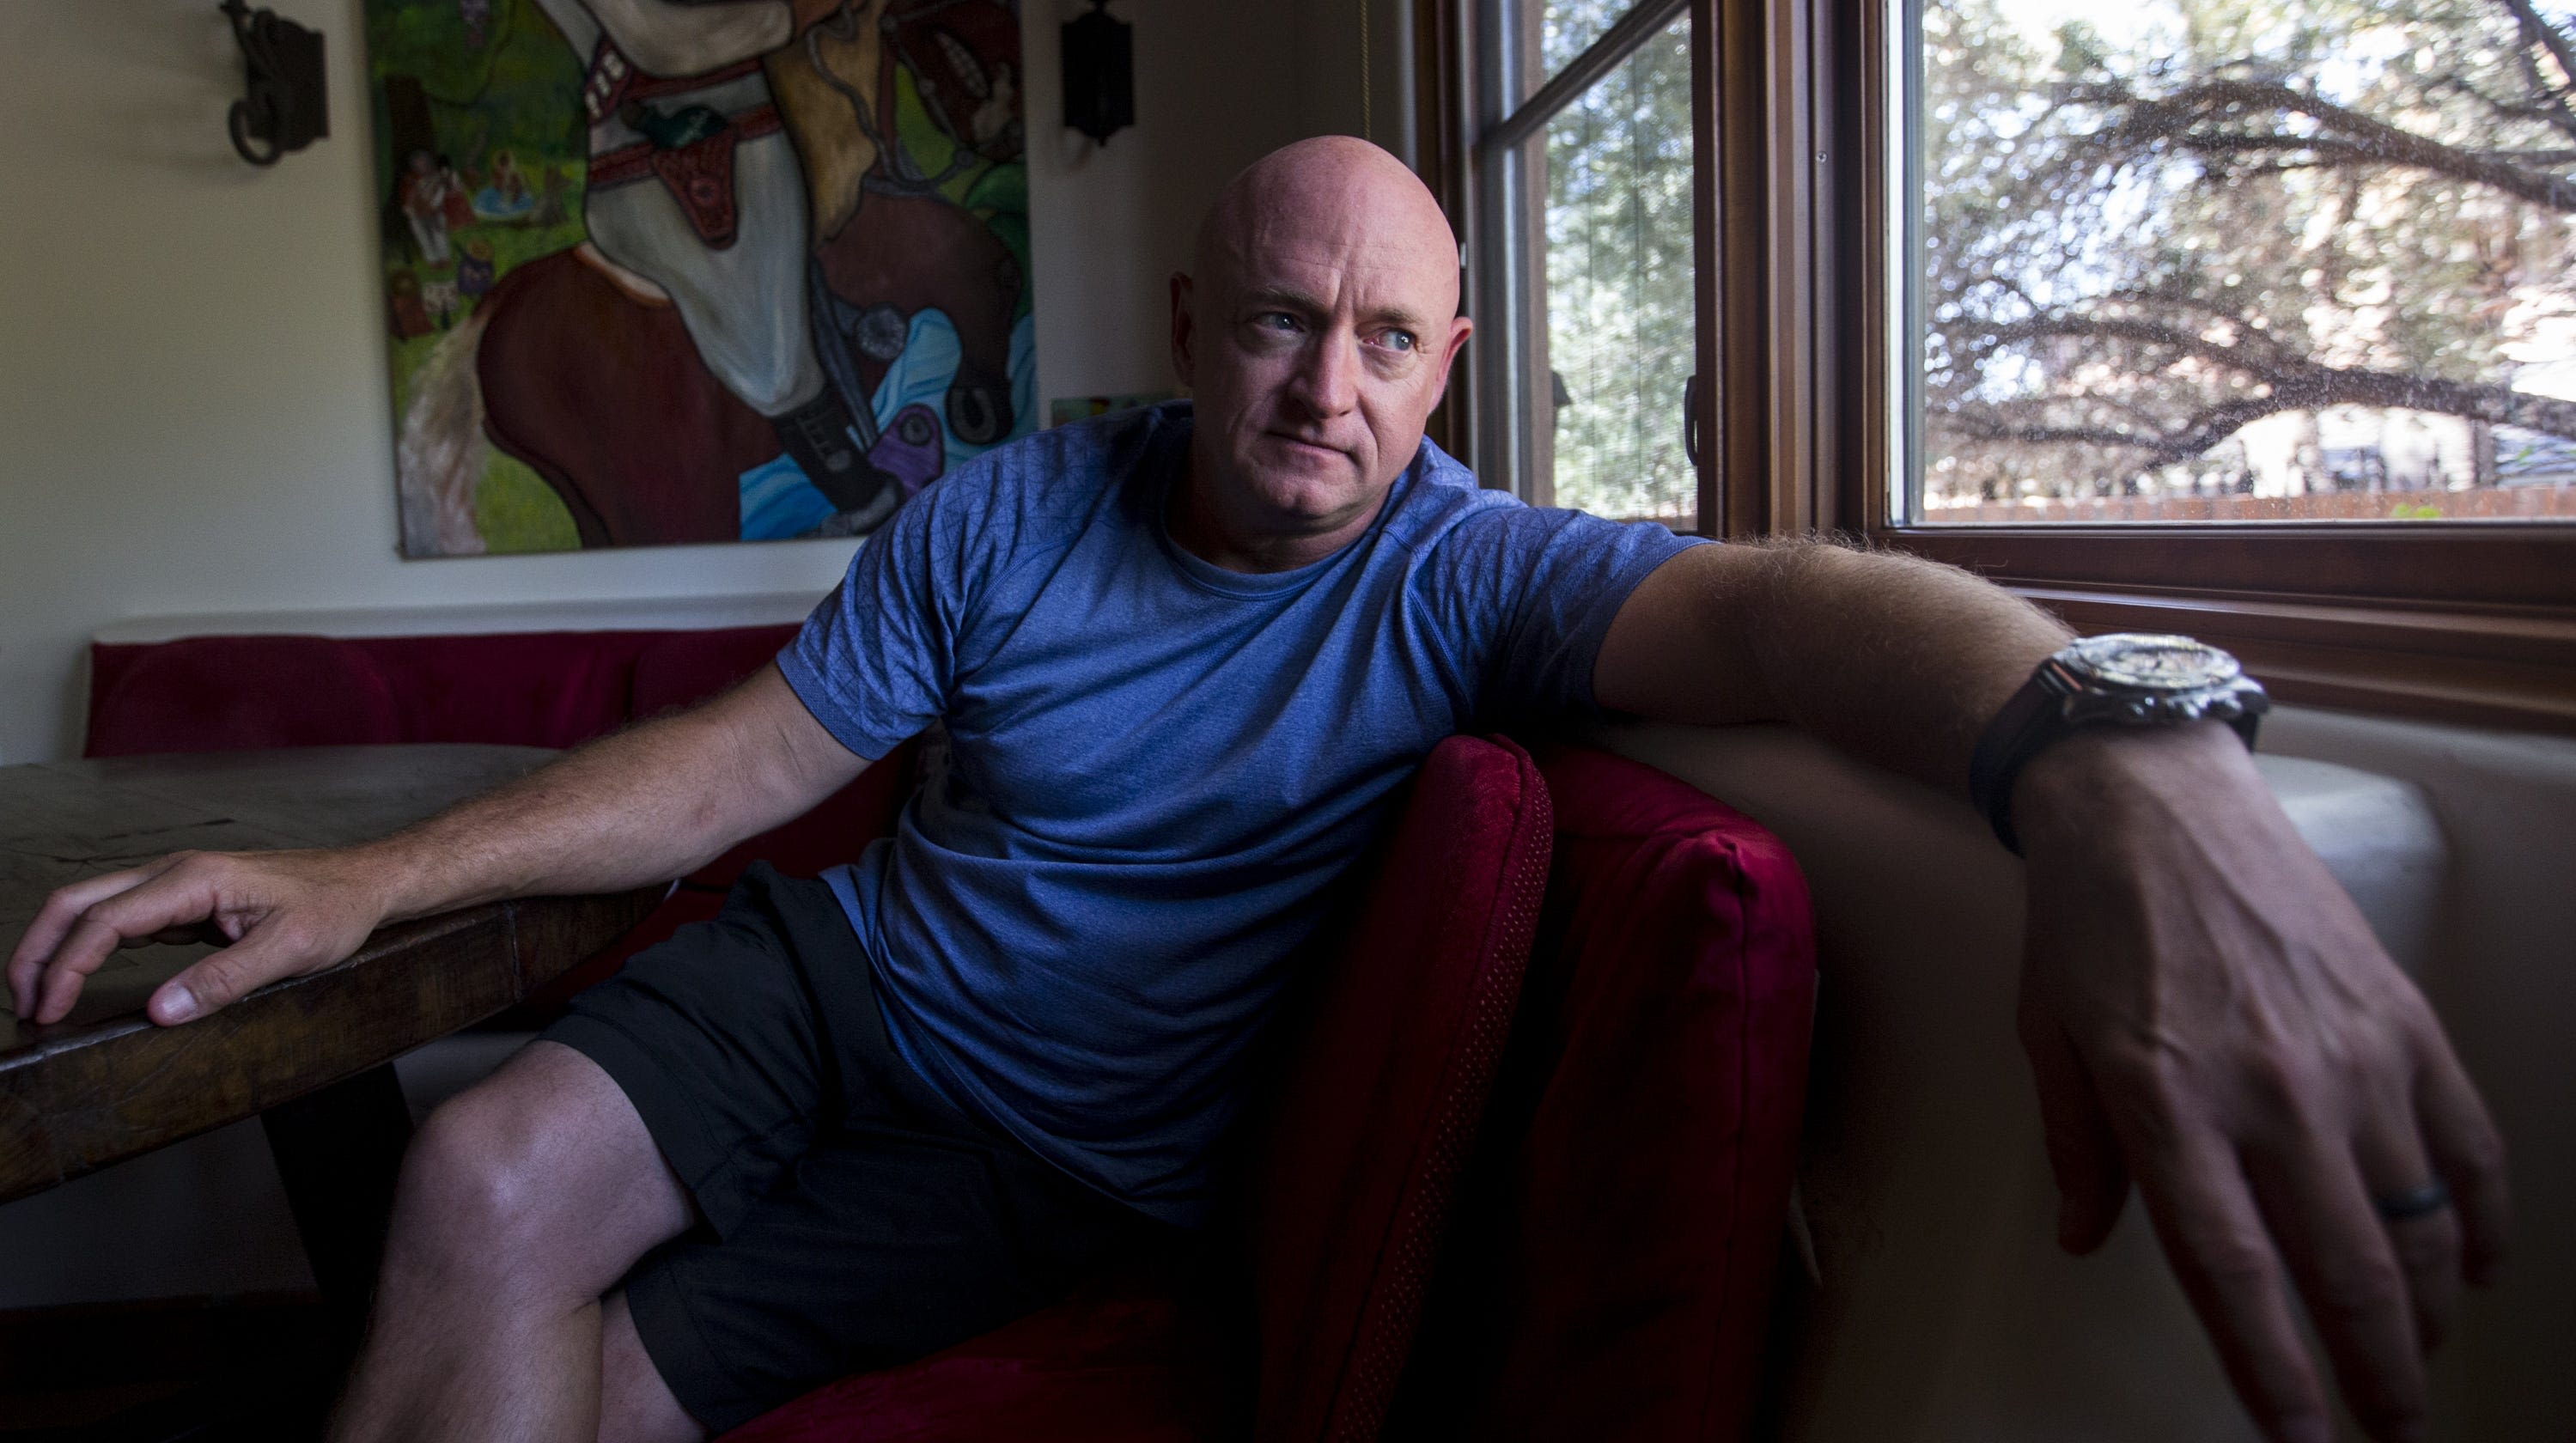 Arizona Sen. Mark Kelly once said he never aspired to politics, but 'I do get asked a lot'